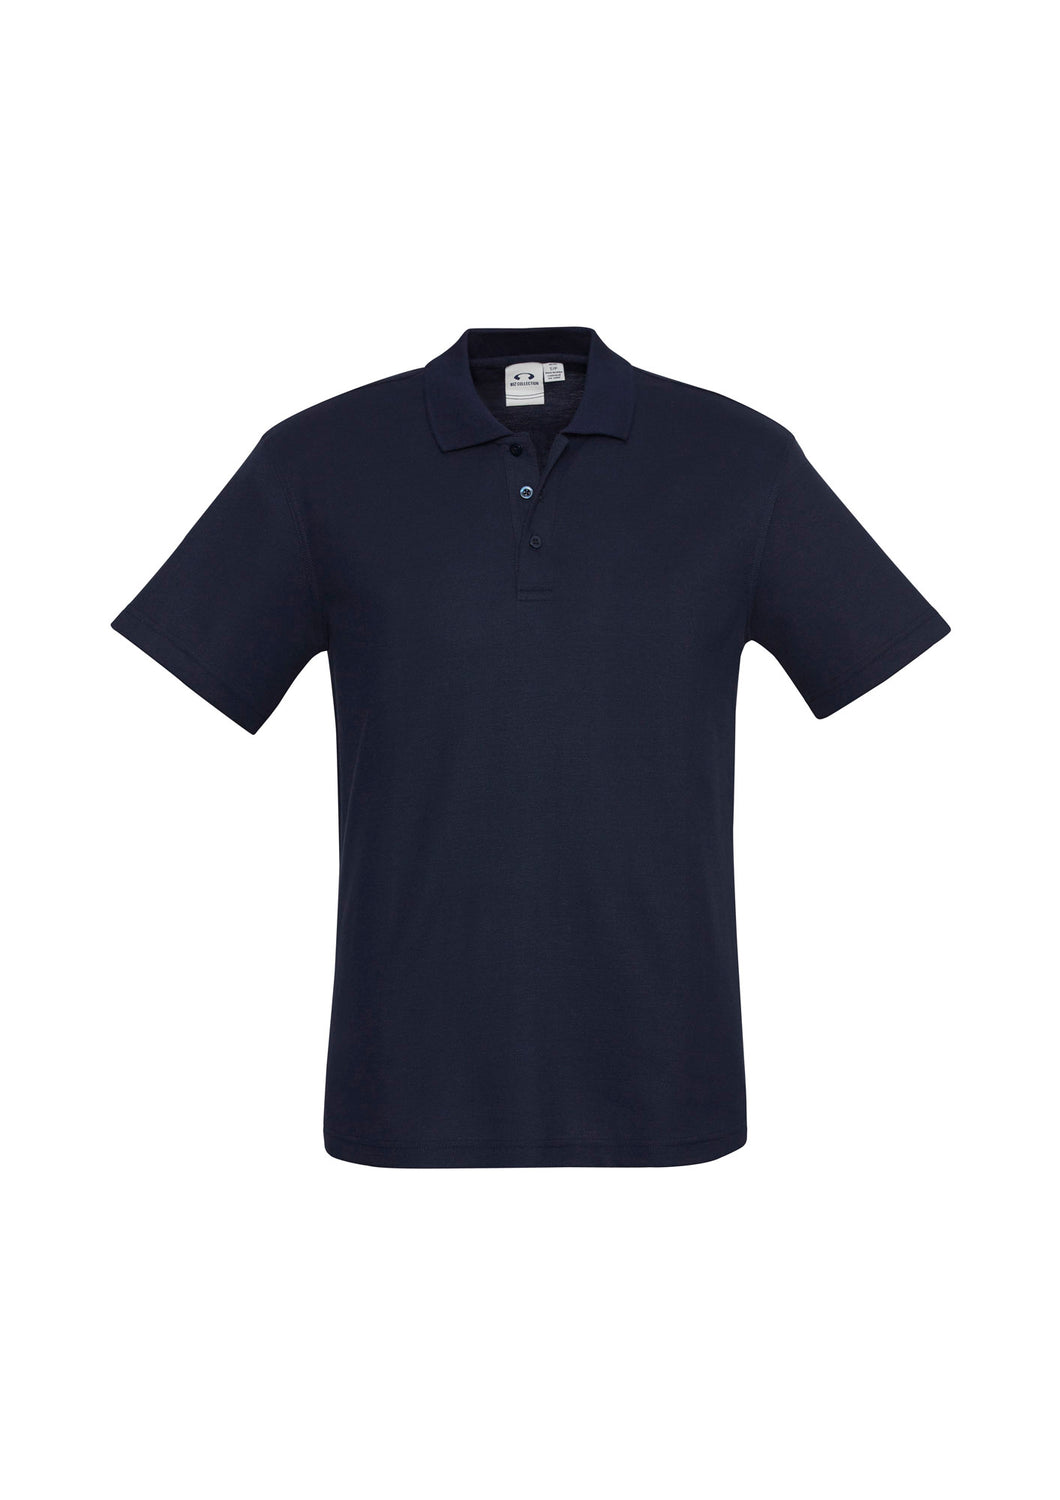 Kids Classic Pique Knit Polo - Navy